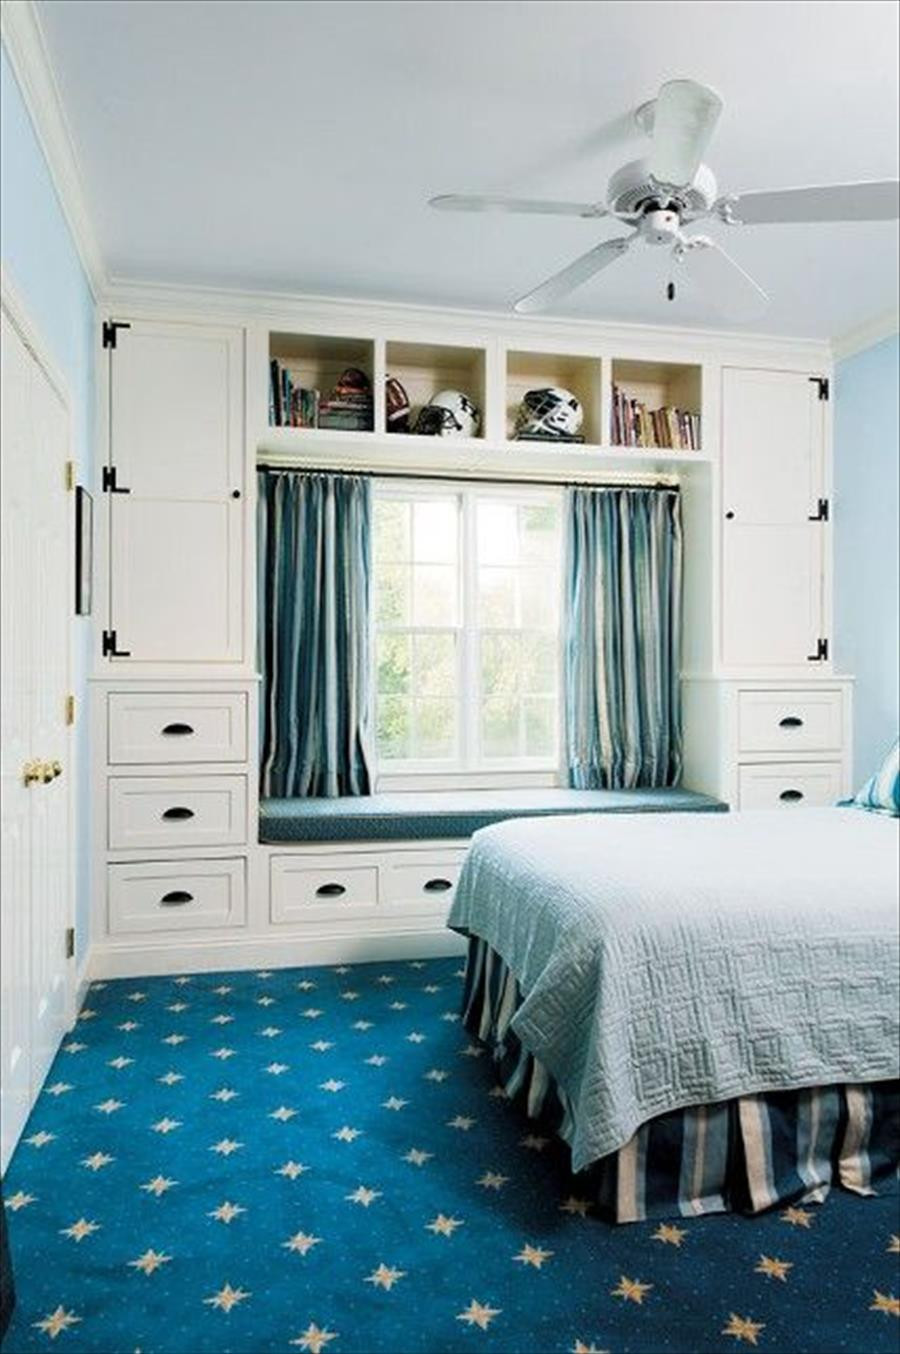 Storage Ideas For Small Bedroom
 31 Simple But Smart Bedroom Storage Ideas